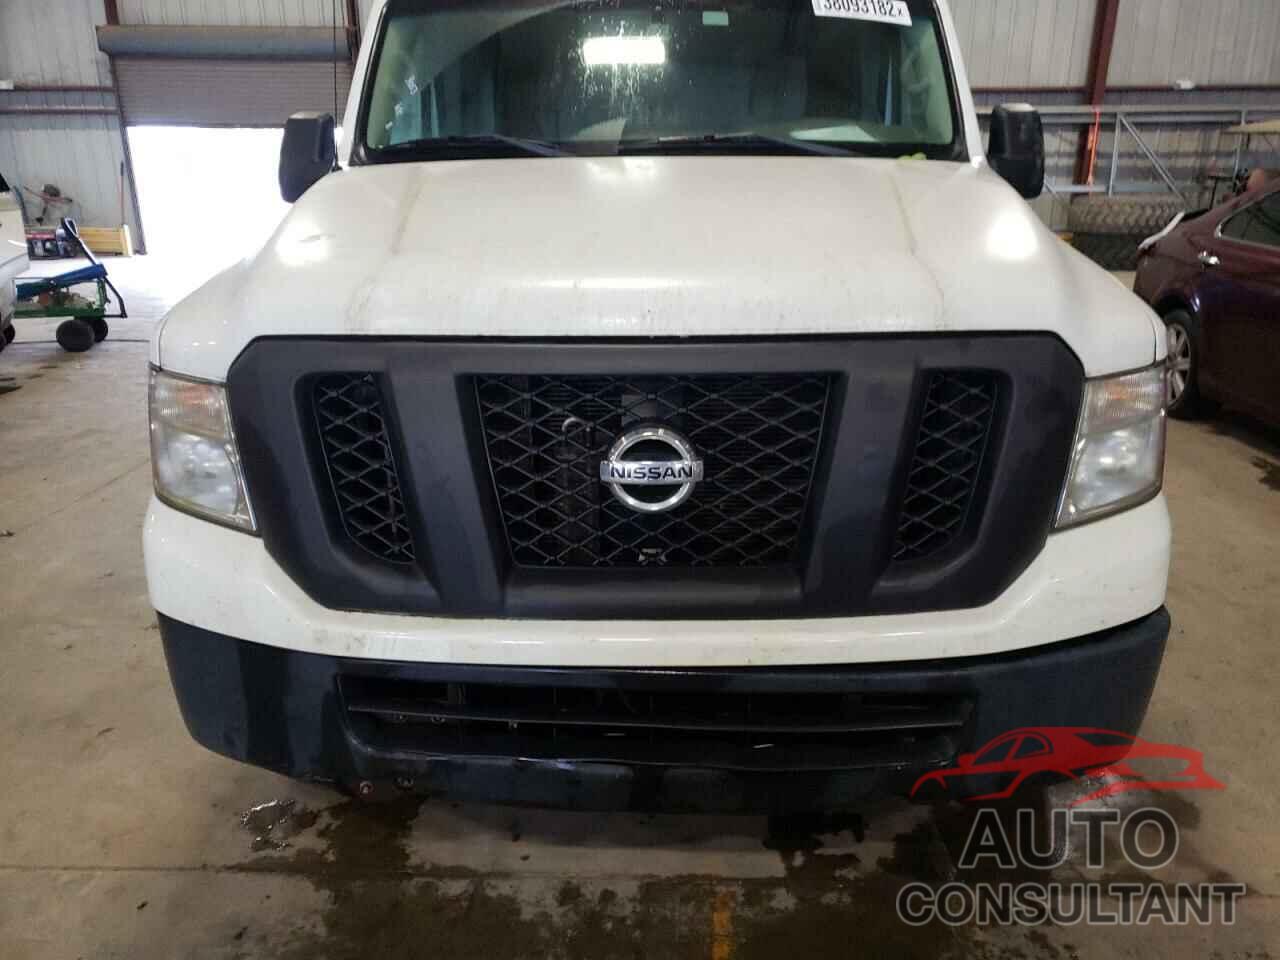 NISSAN NV 2016 - 1N6BF0LY7GN816822